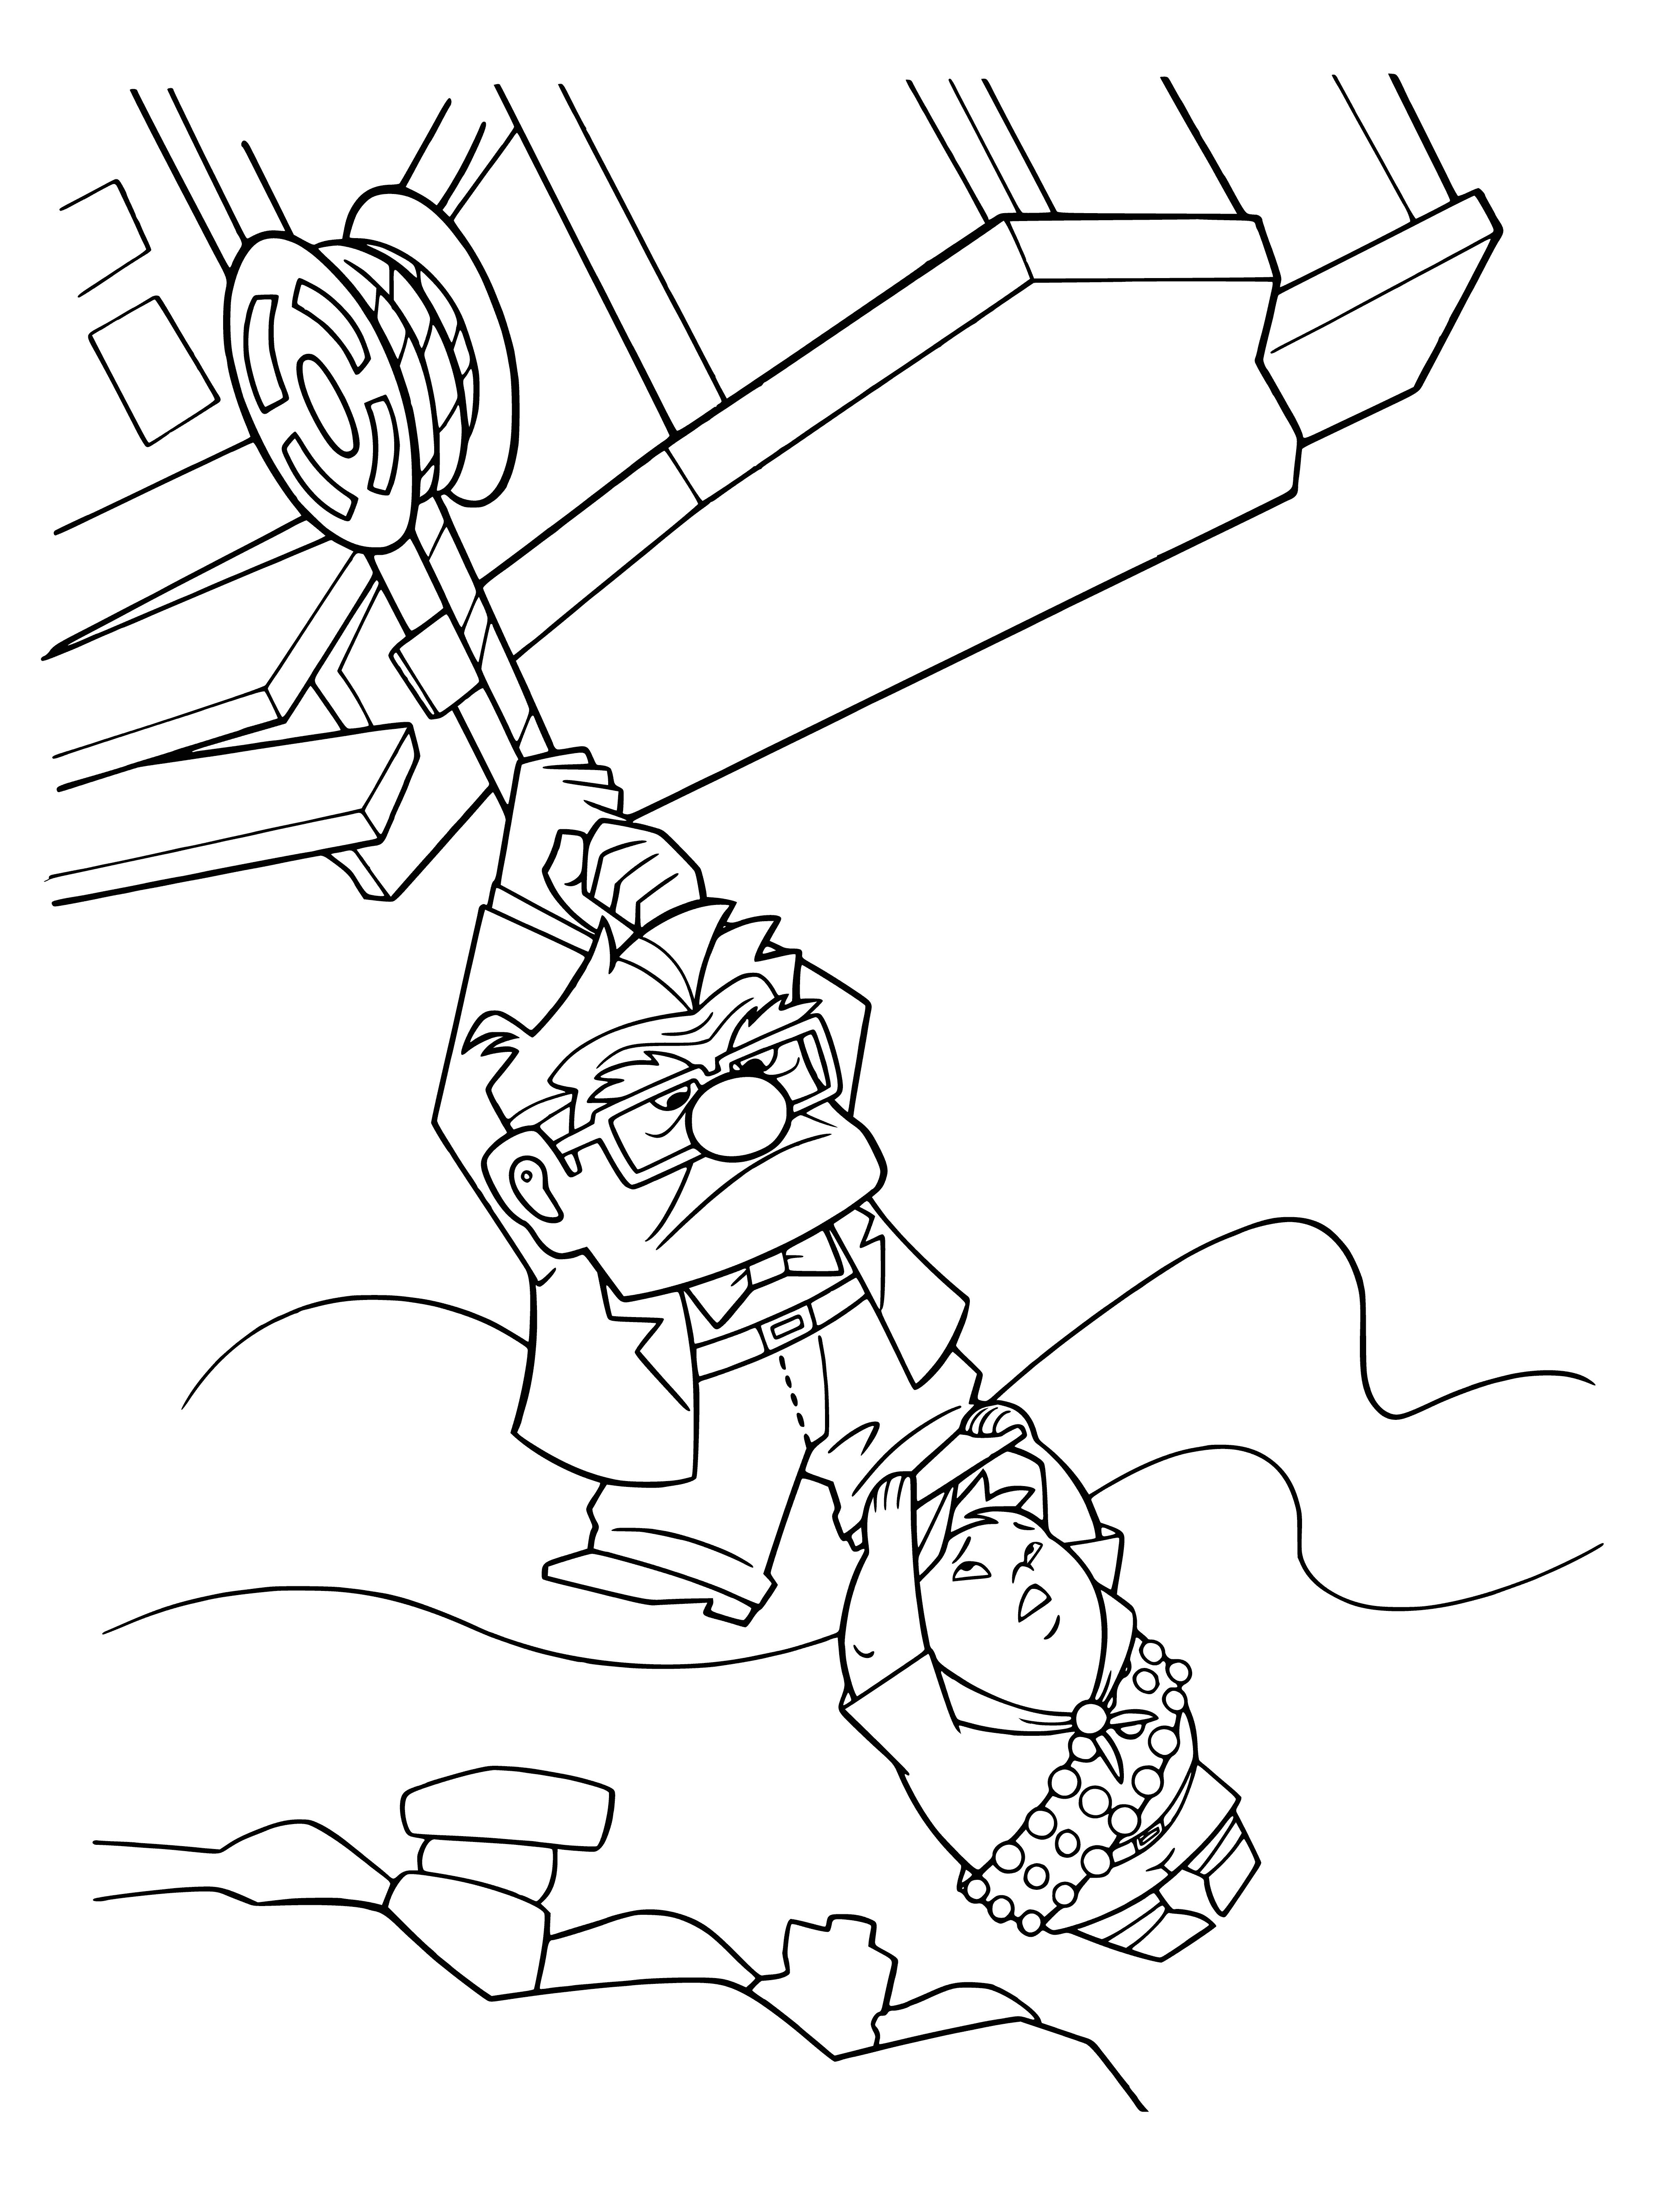 The house can fly away coloring page